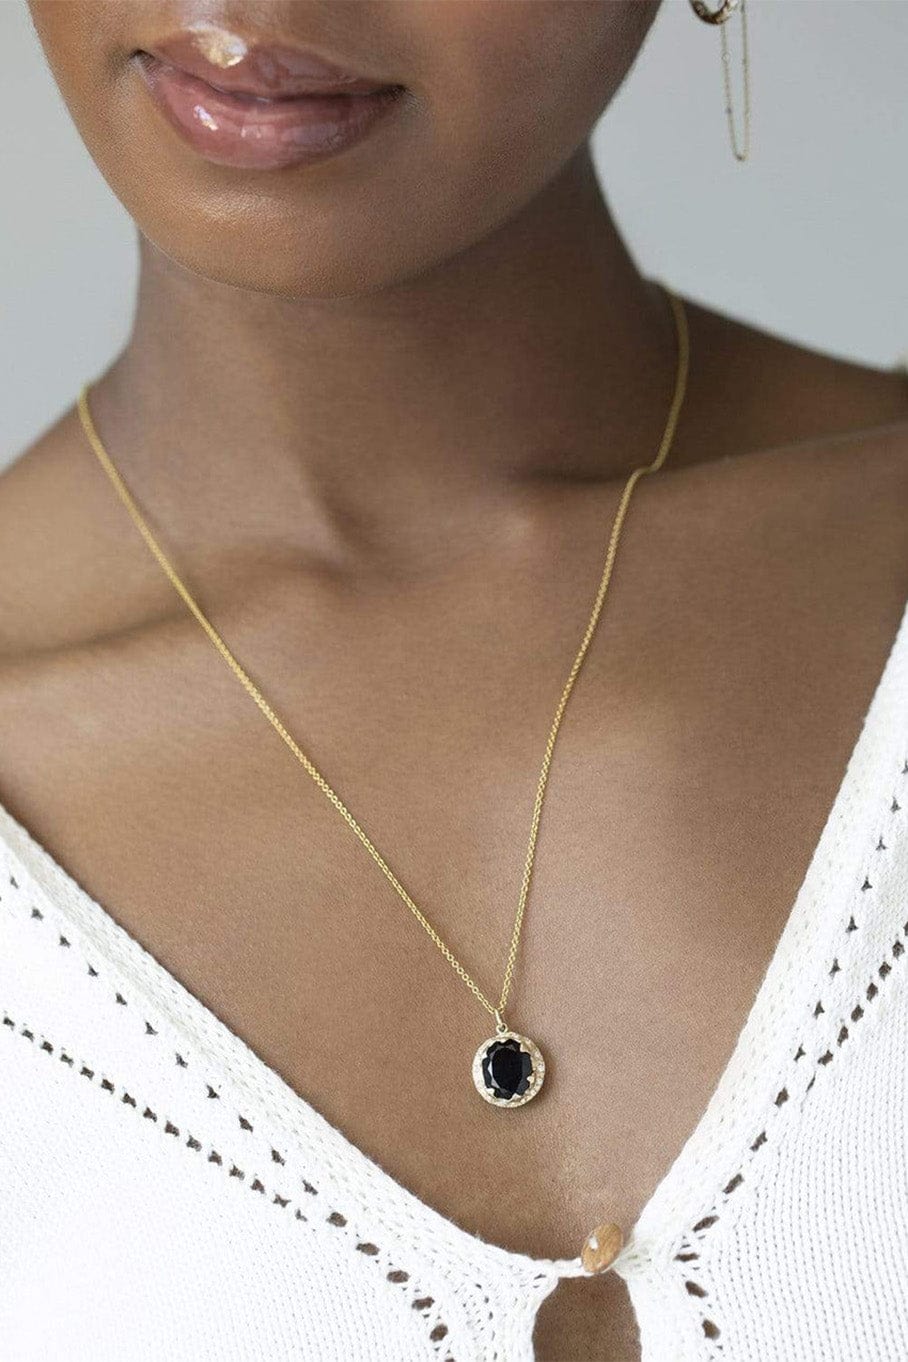 LOGAN HOLLOWELL-Queen Oval Onyx Diamond Necklace-YELLOW GOLD